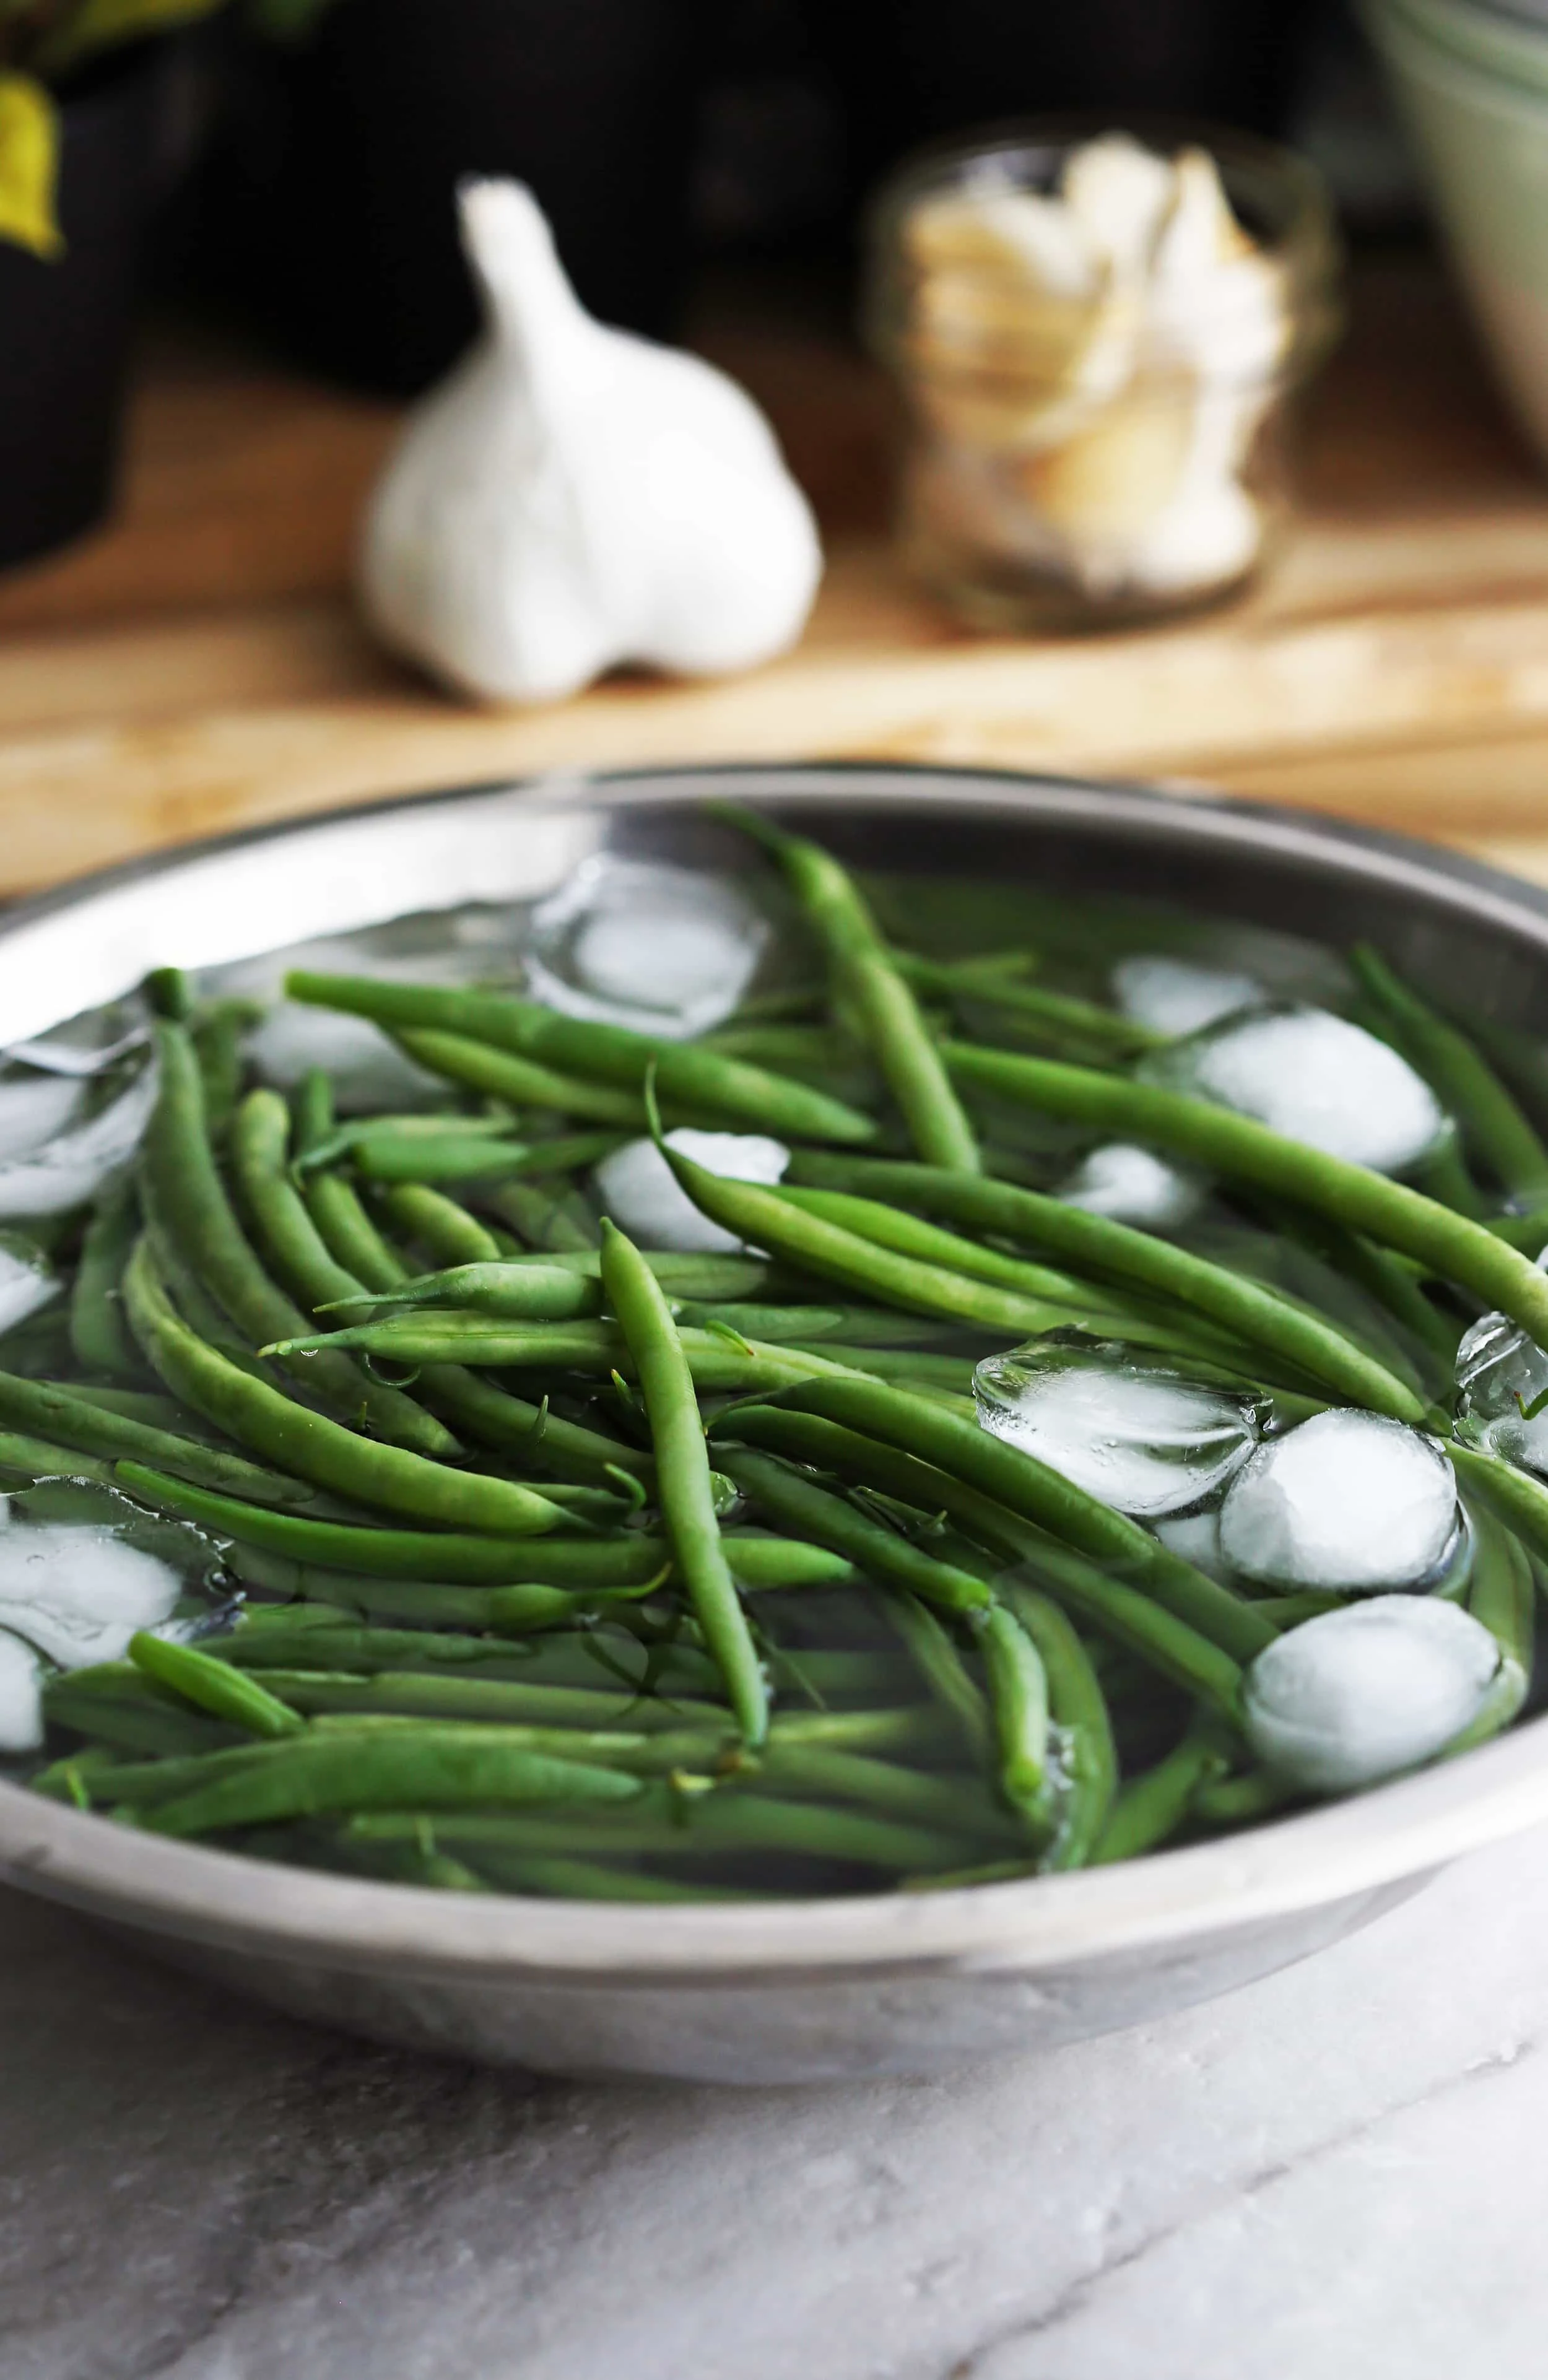 Blanched French green beans in an ice bath.